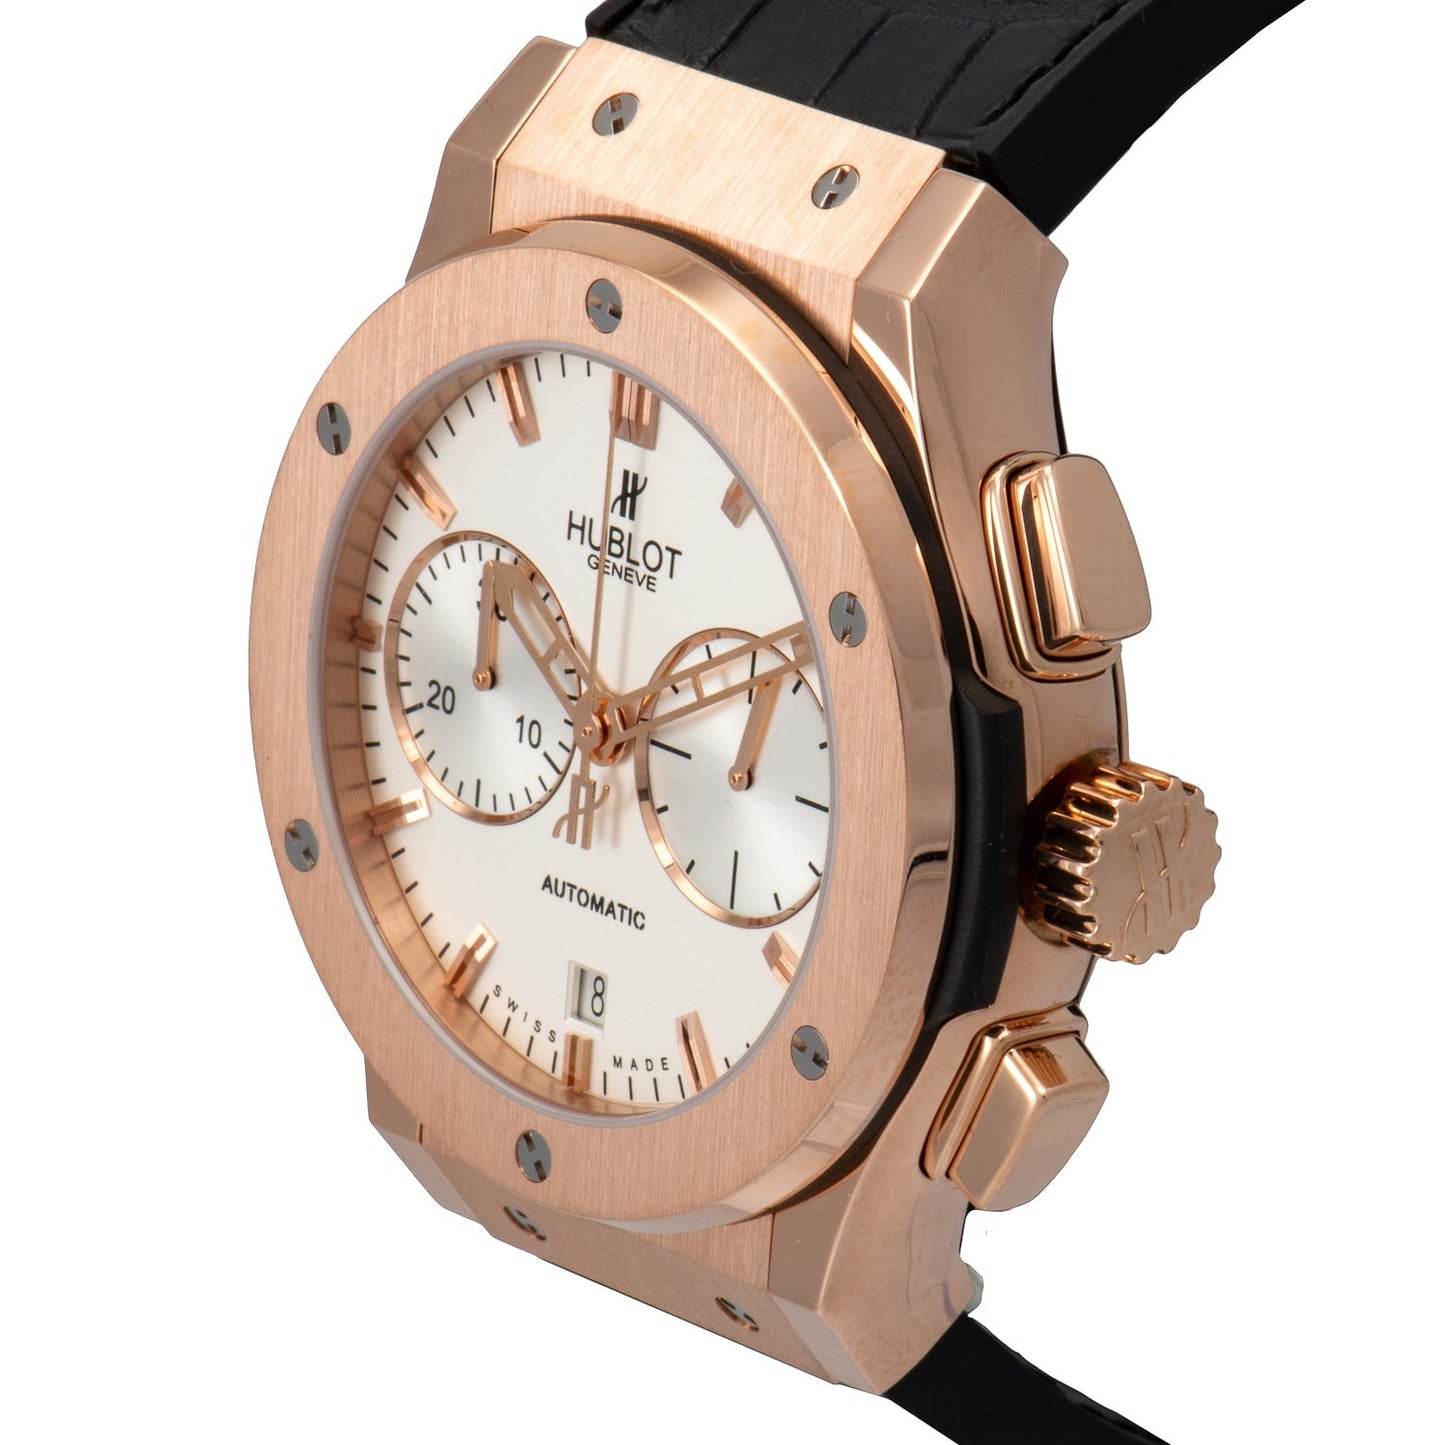 Hublot Classic Fusion 18kt Rose Gold Chronograph Automatic Mens Watch 521.OX.2610.LR